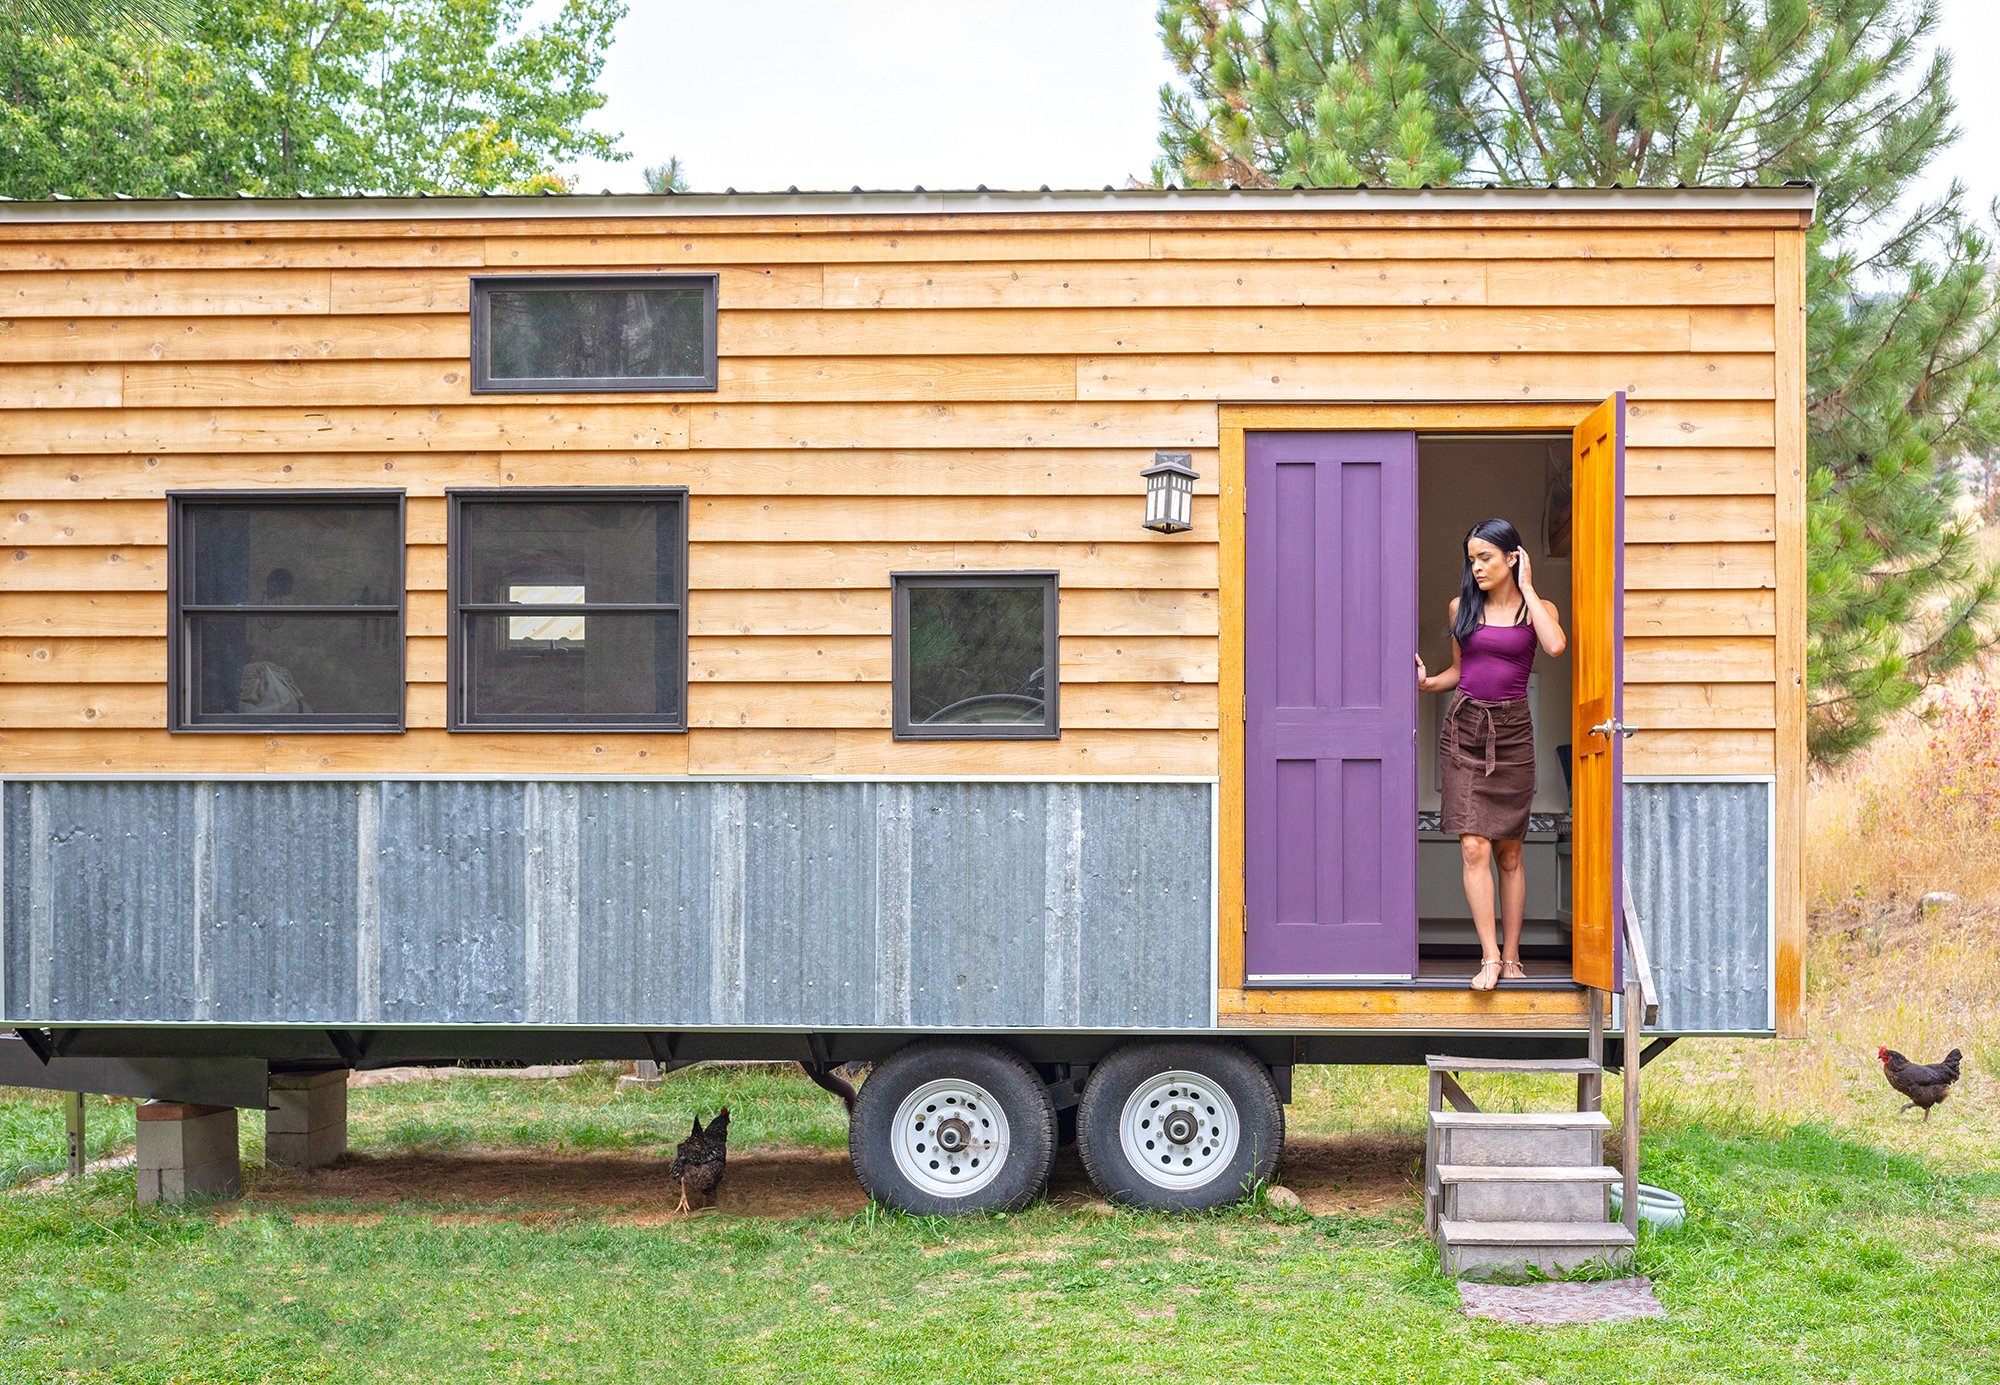 Move over McMansions, it's tiny house time